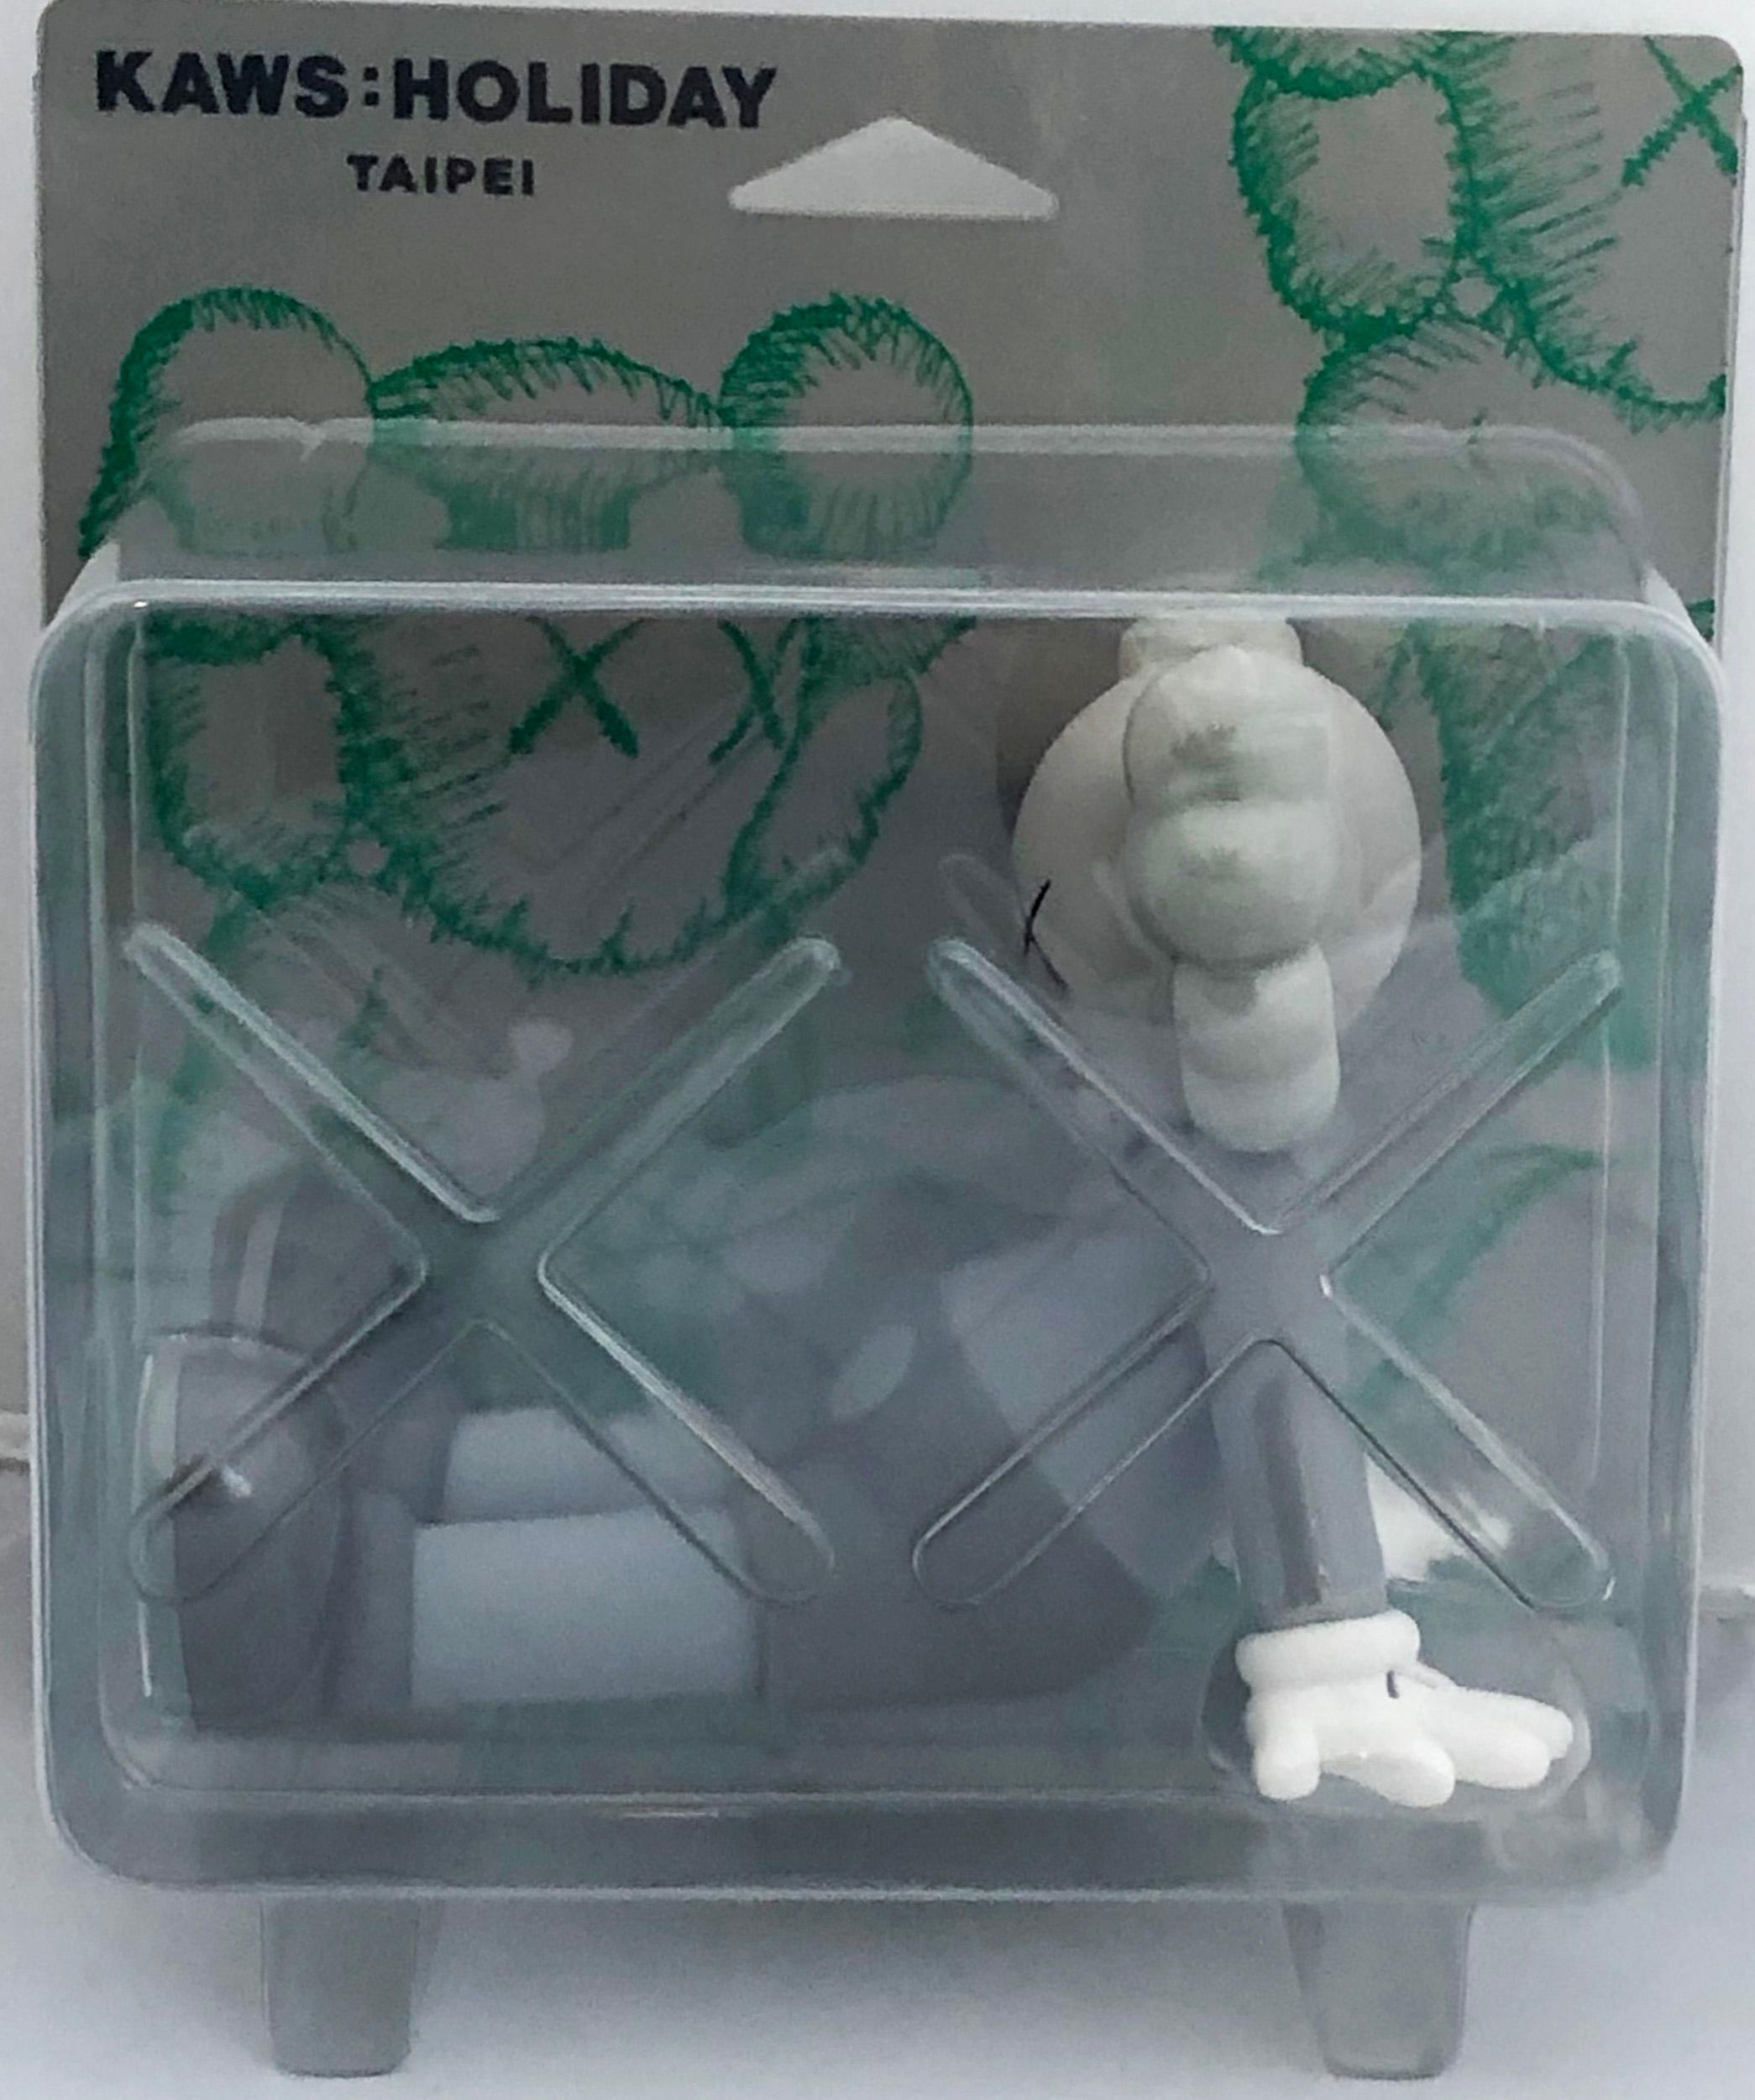 KAWS Grey Holiday Companion (KAWS Taipei) 
The artwork KAWS' signature character COMPANION in a resting seated position. This figurine was published by All Rights Reserved to commemorate the debut of KAWS’ largest sculptural endeavor to date: a 36